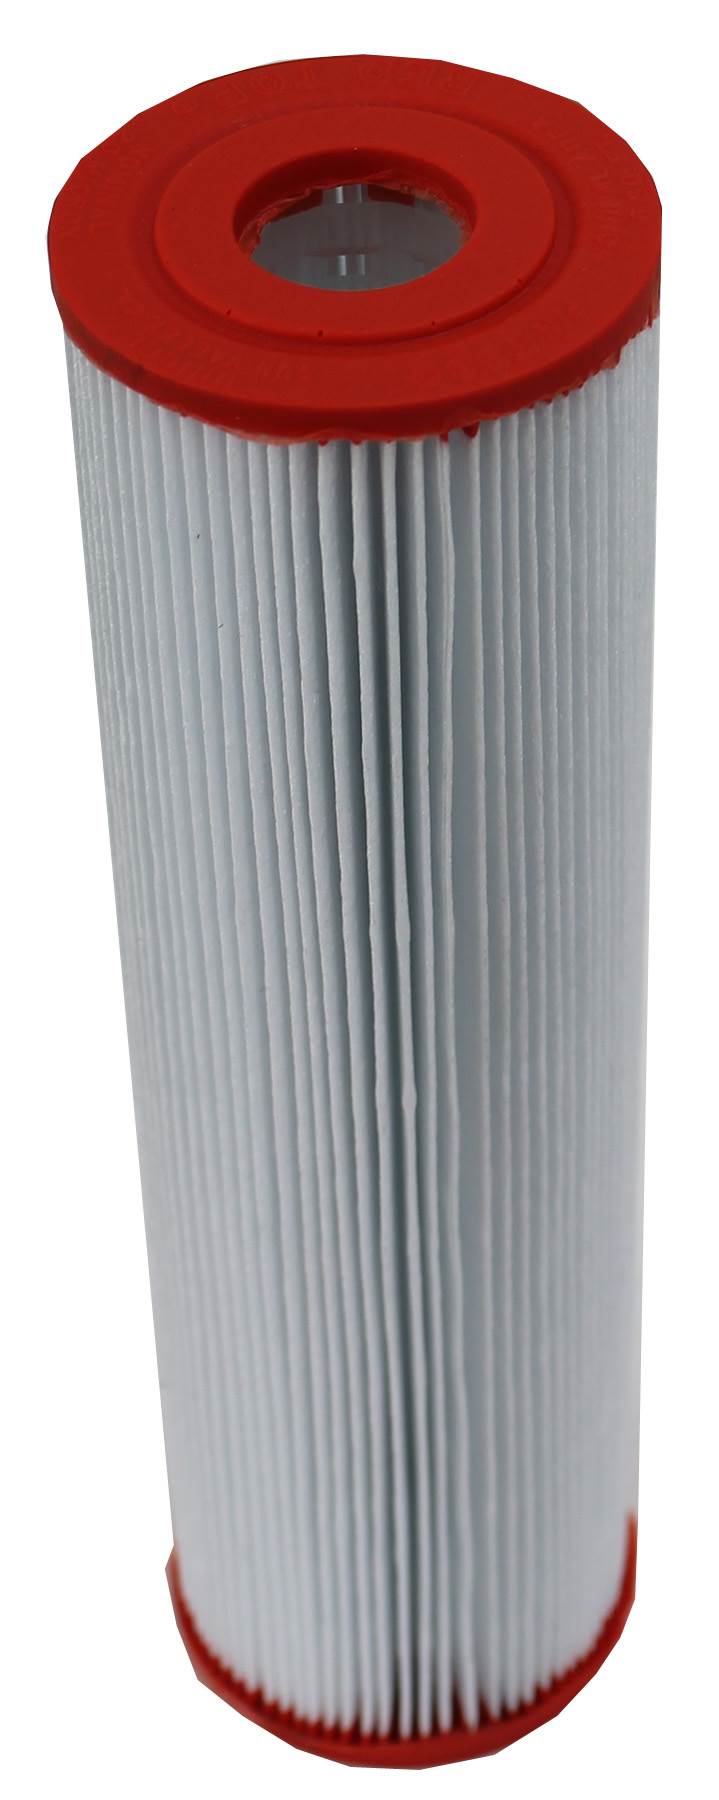 Unicel T-380 T-380R Harmsco Replacement Swimming Pool Cartridge Filter (16 Pack)